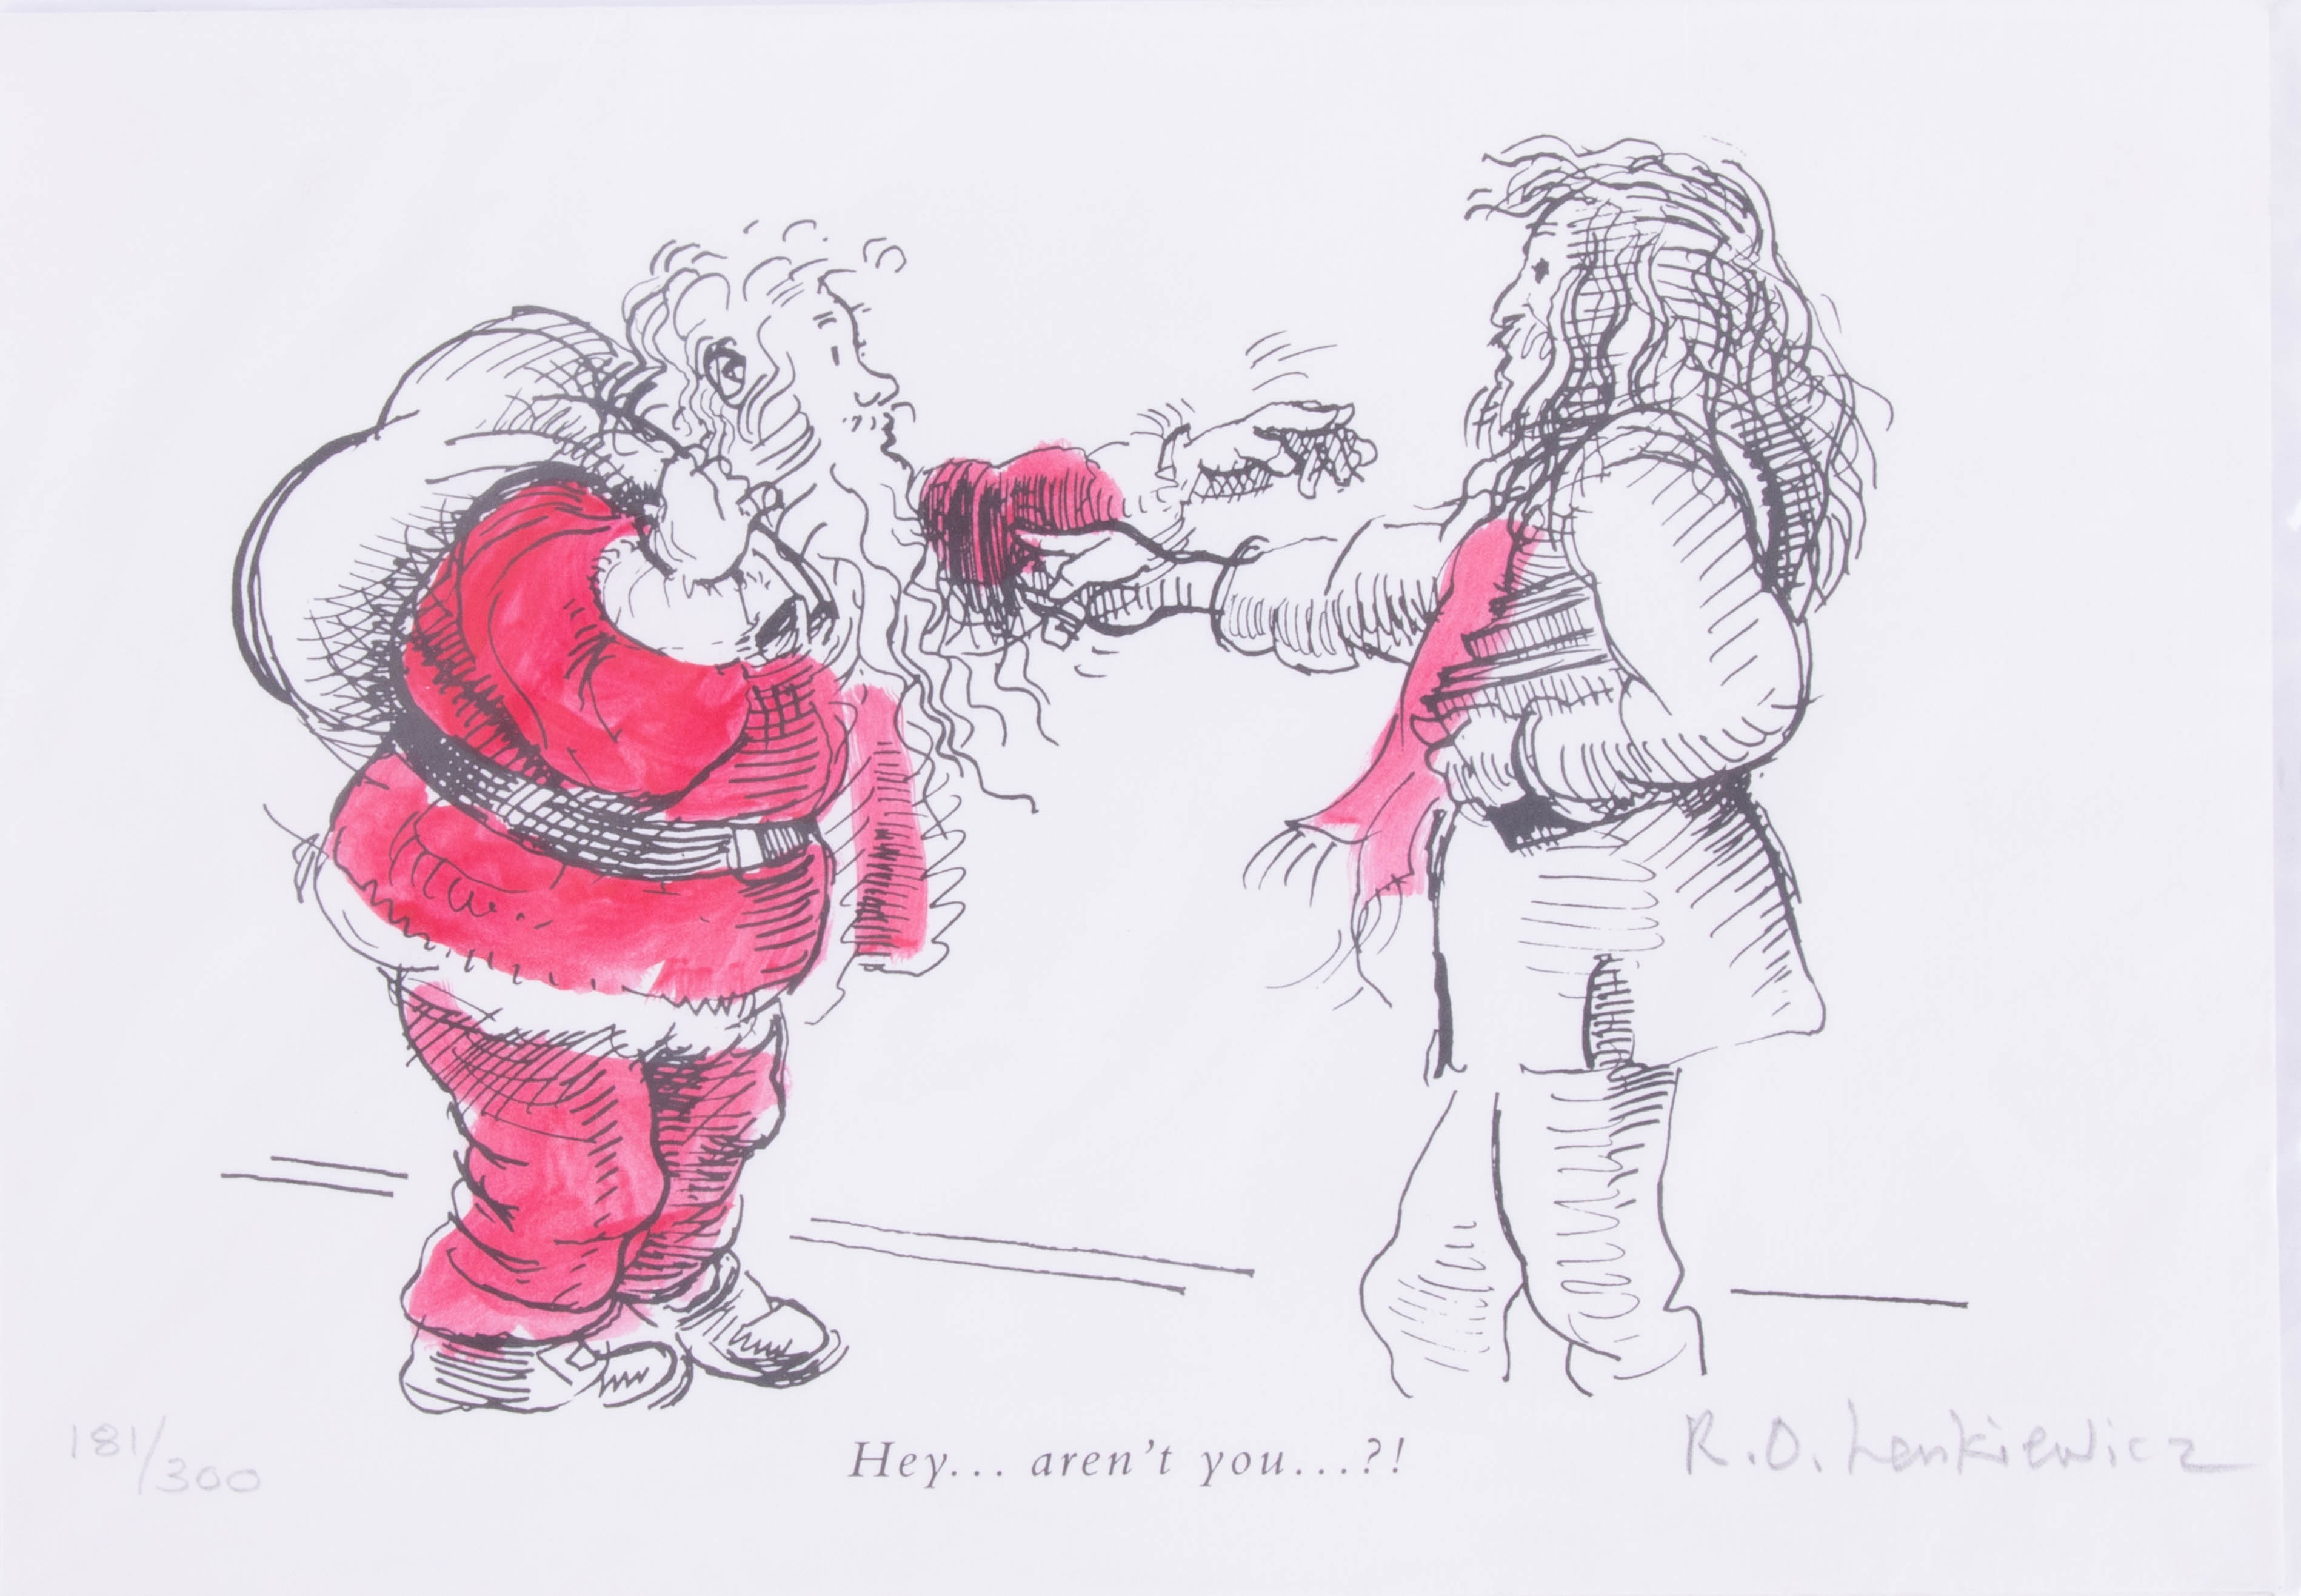 Christmas Card, 'Hey... Aren't You... ?! limited edition 181/300, signed in pencil by Robert - Image 2 of 3